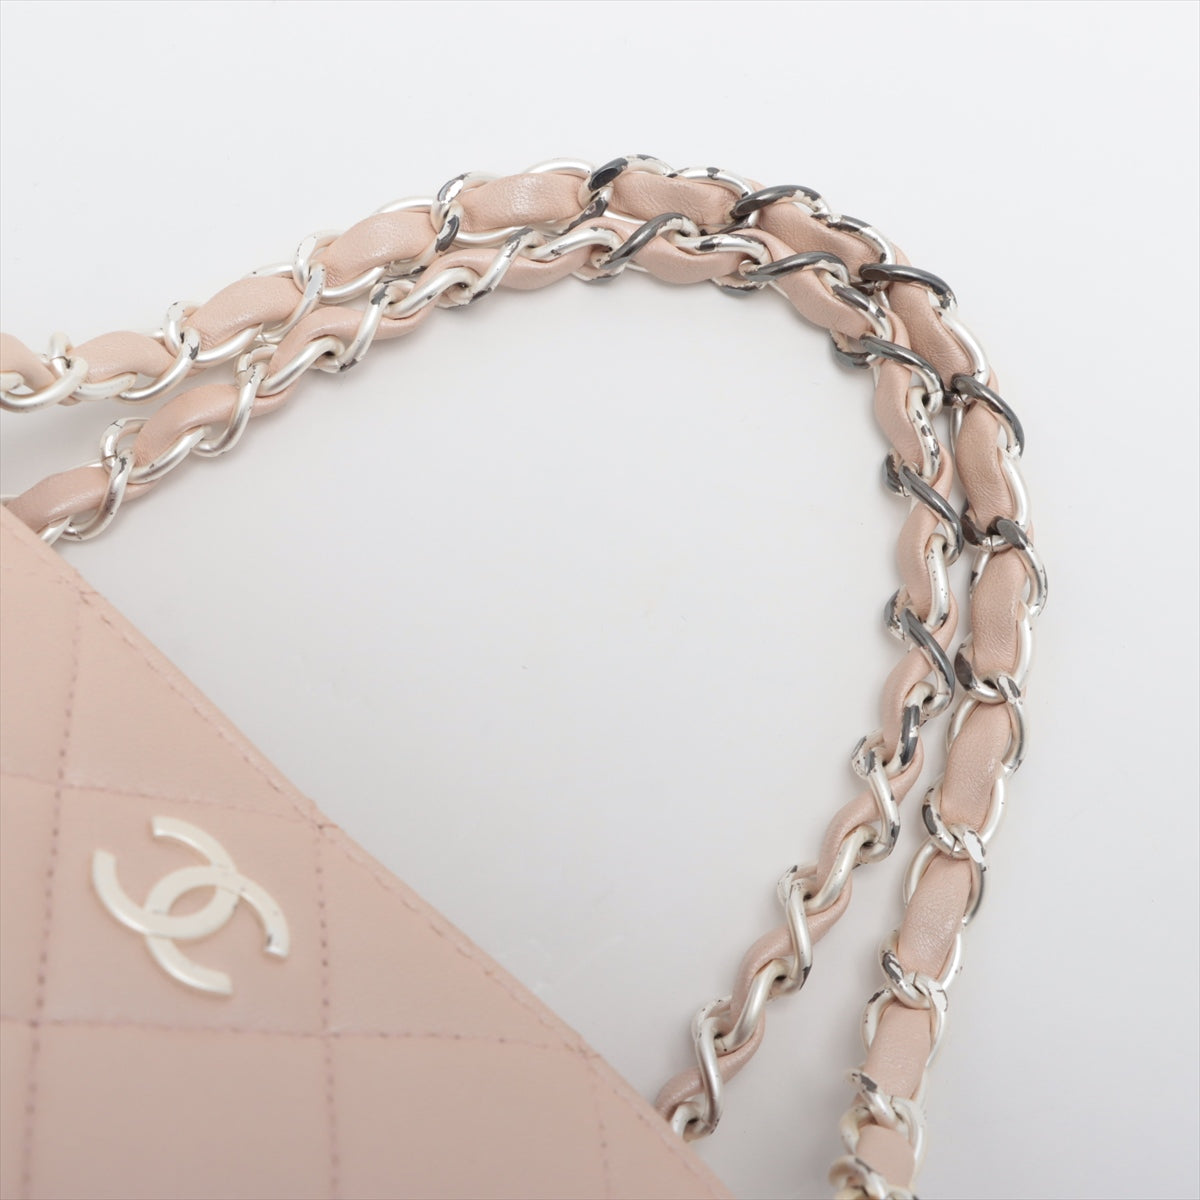 Chanel Matelasse Leather Chain handbag Pink Silver Metal Fittings 6XXXXXX